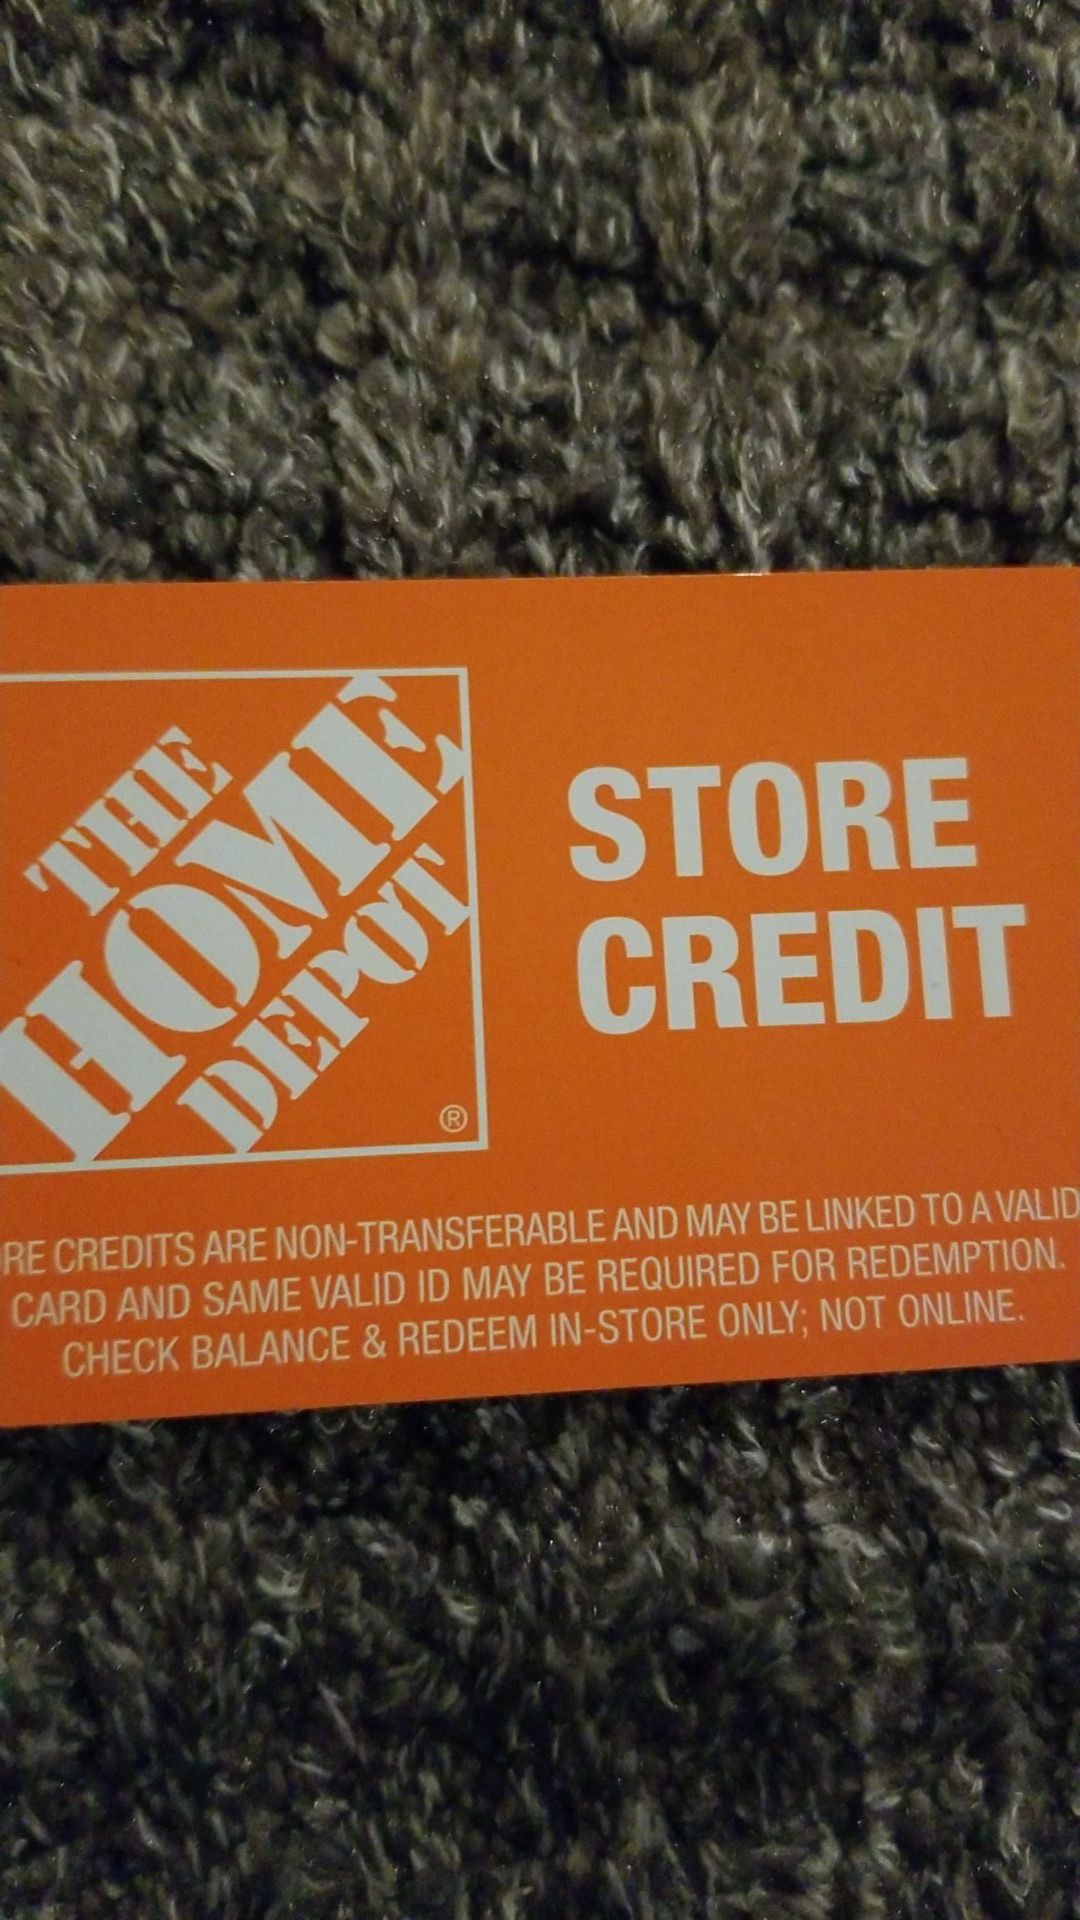 Home depo store credit 251.69